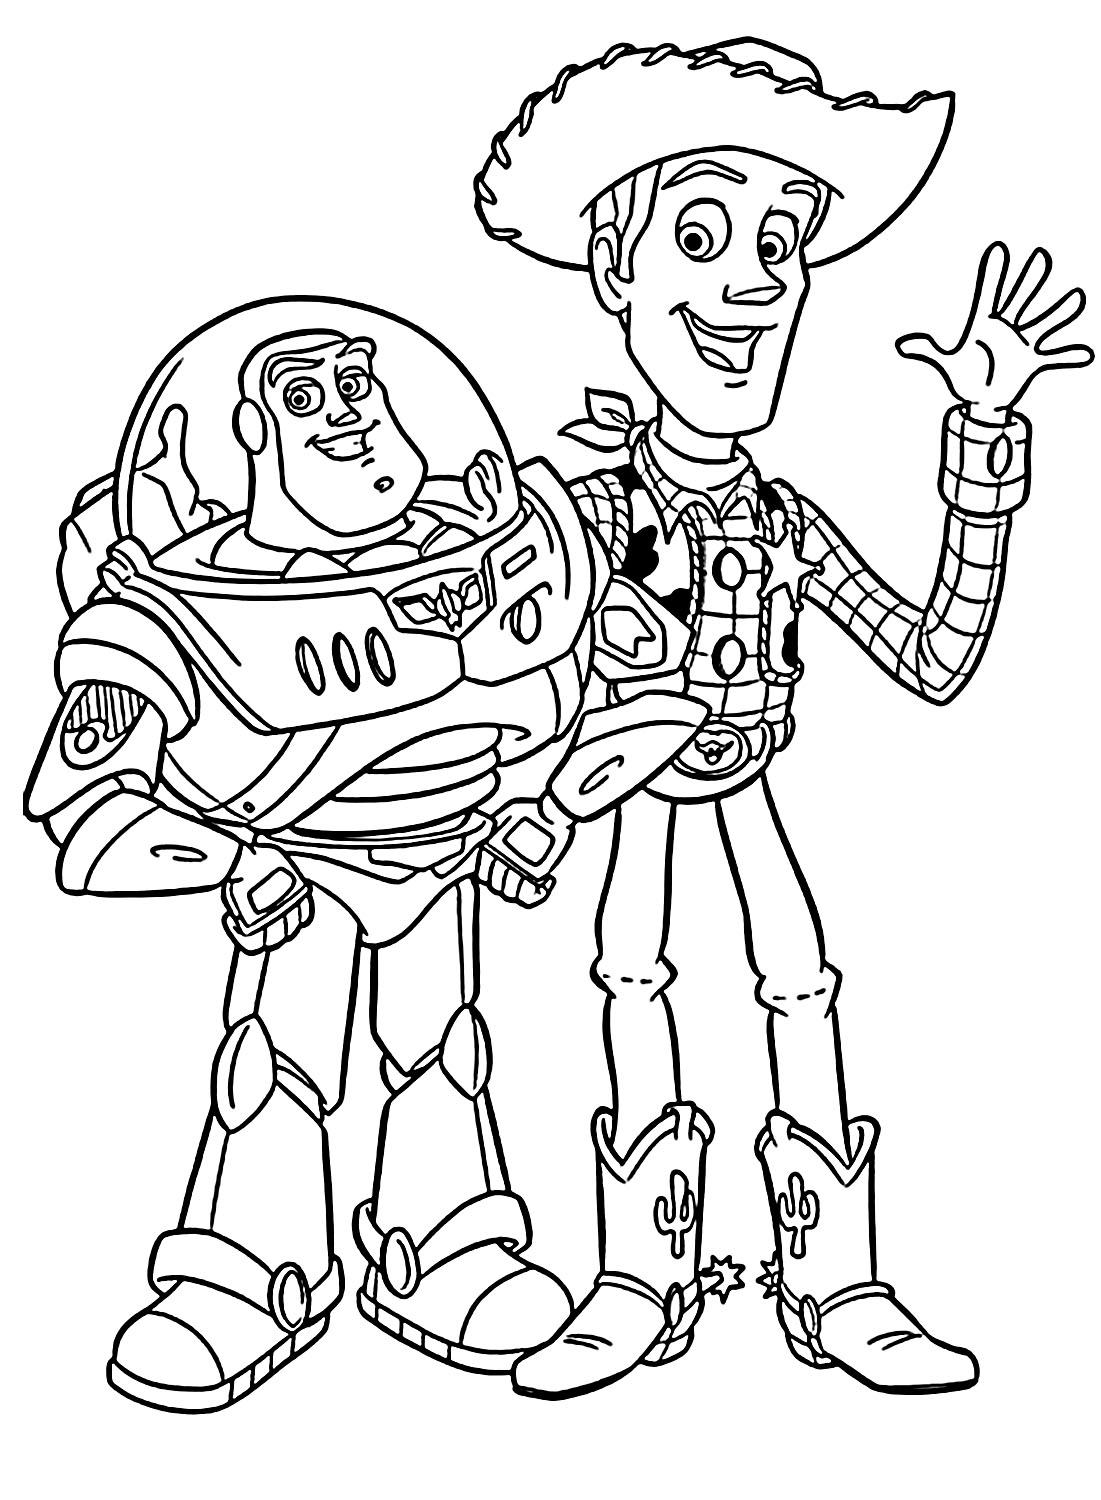 Woody and Buzz from Toy Story